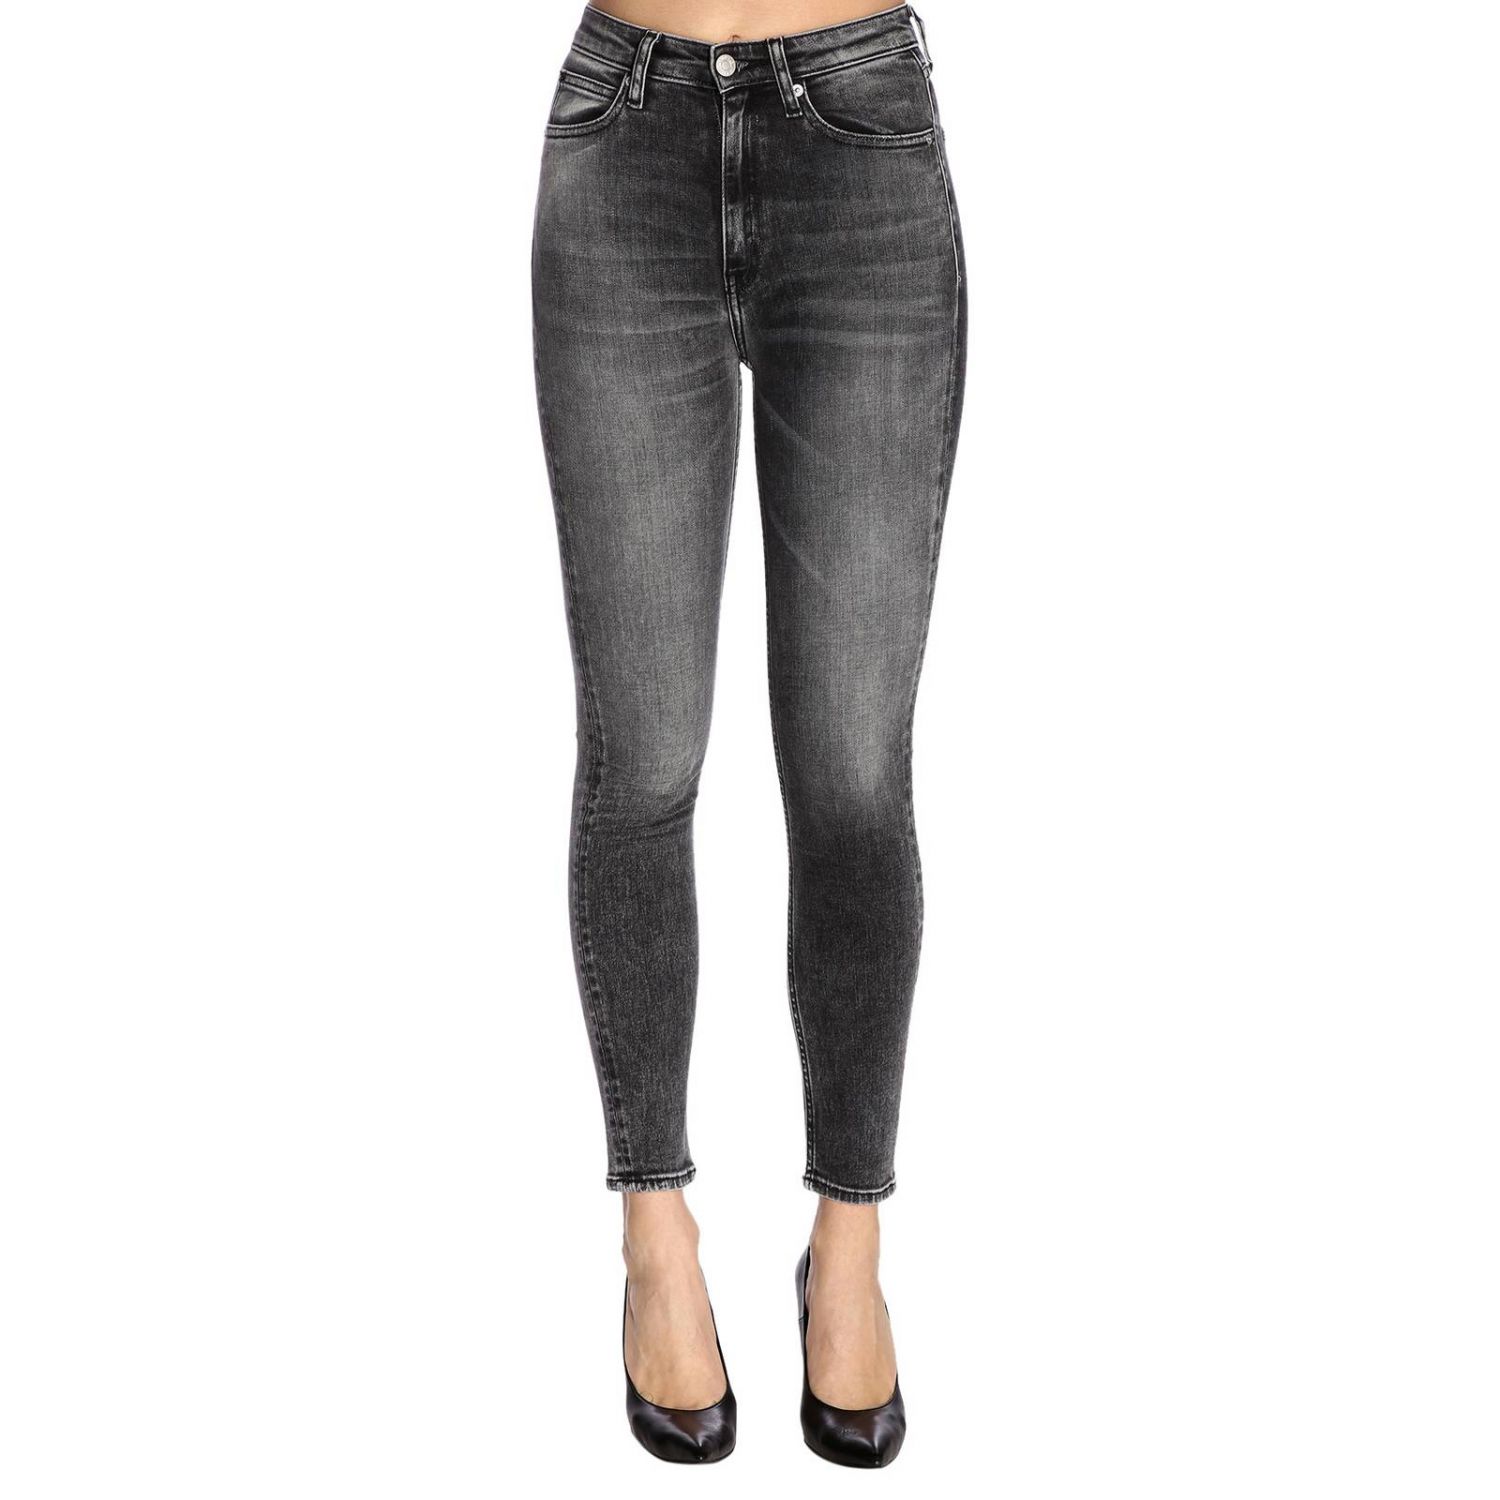 Calvin Klein Jeans Outlet: jeans for woman - Grey | Calvin Klein Jeans ...